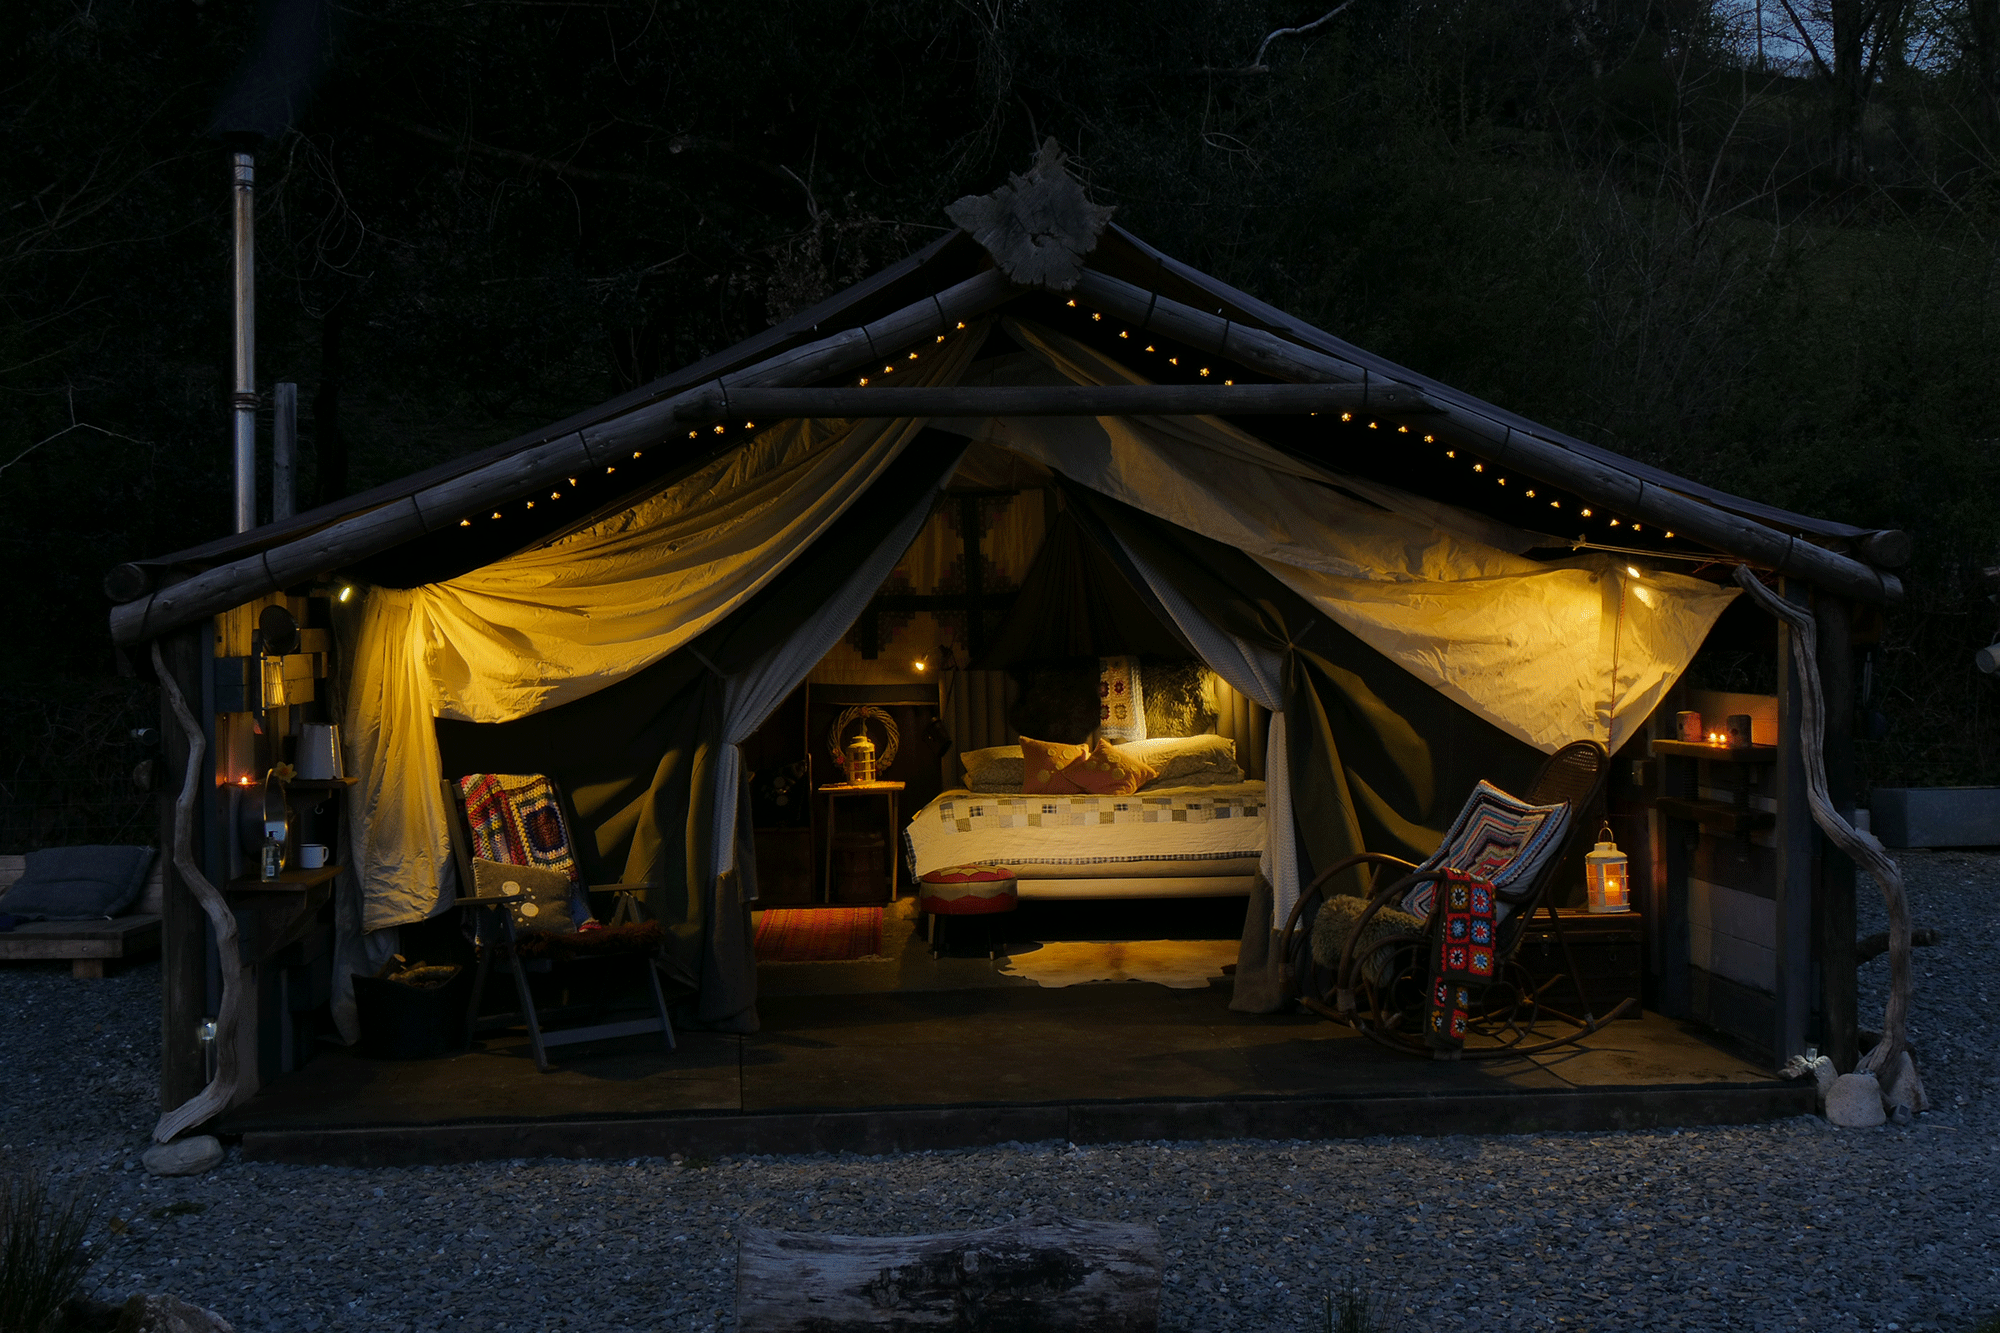 Leewood Glamping, Romantic Rural Seclusion. Connect with Each Other. Connect with Nature,